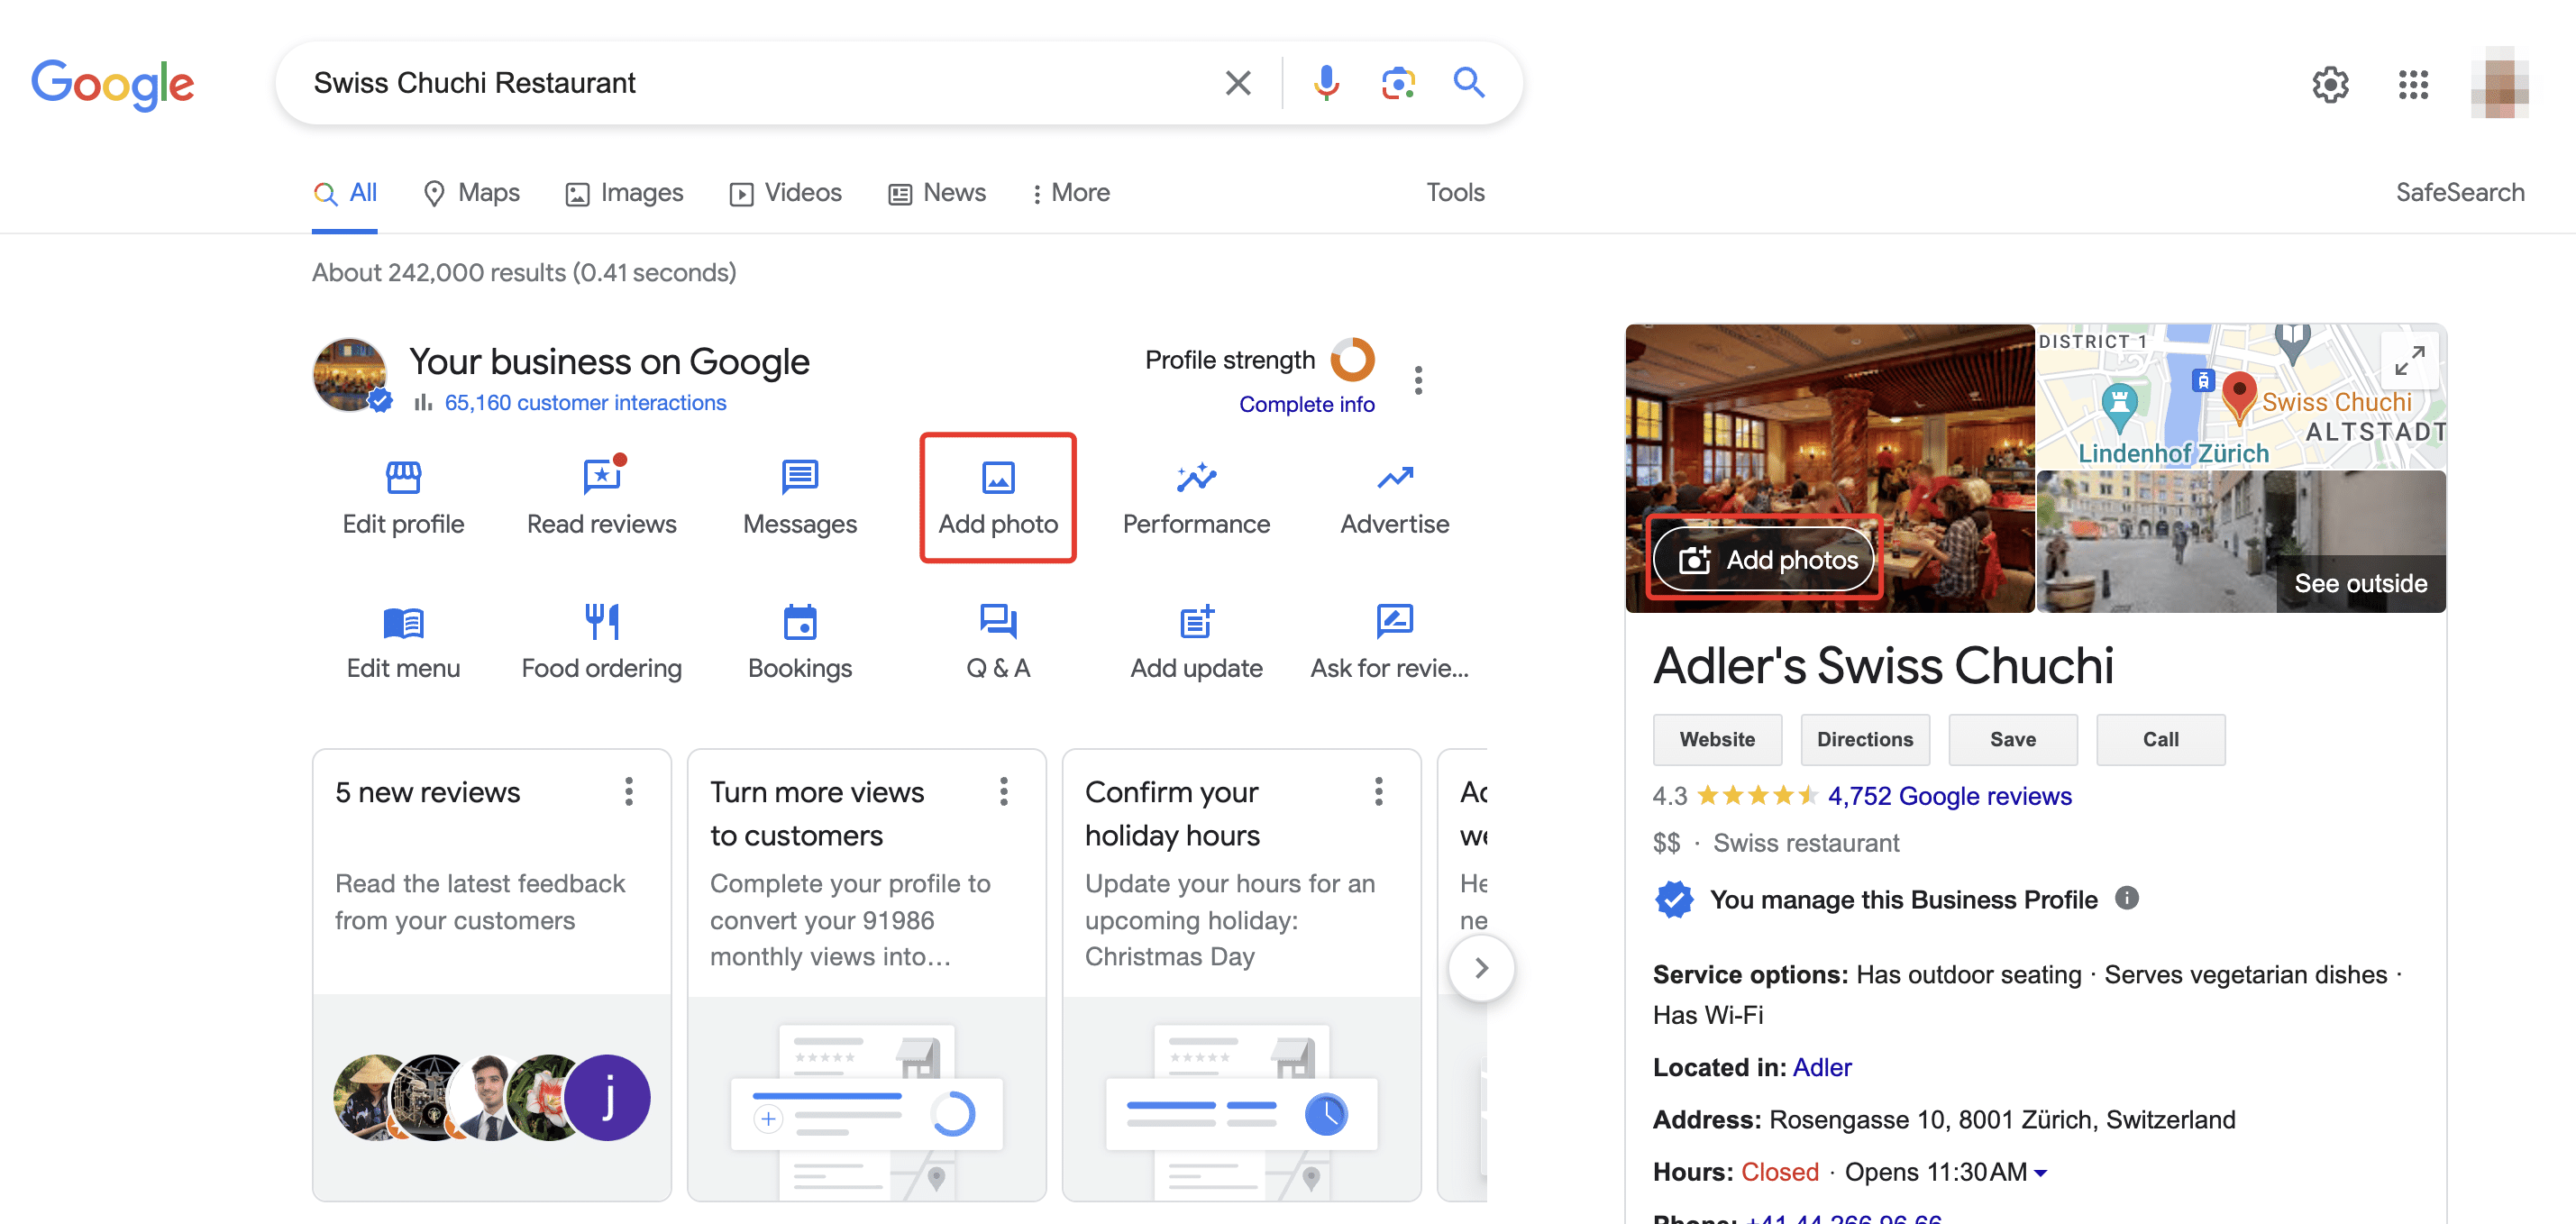 Add photos with Google Search or Google Maps